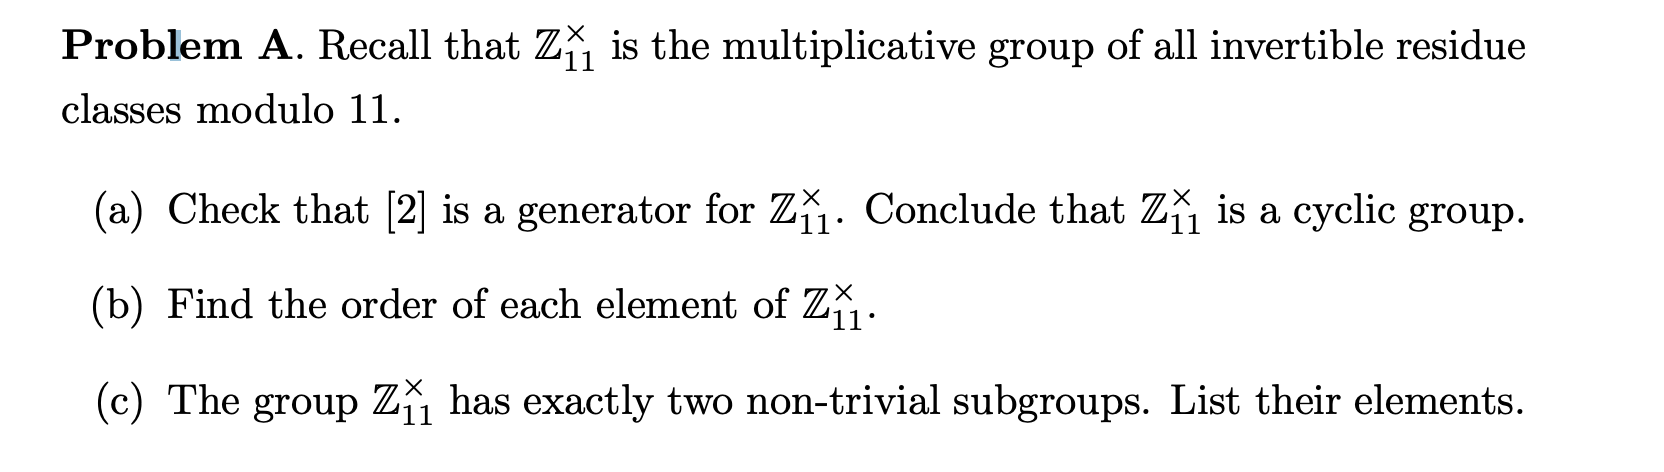 Recall that Z1 is the multiplicative group Chegg.com